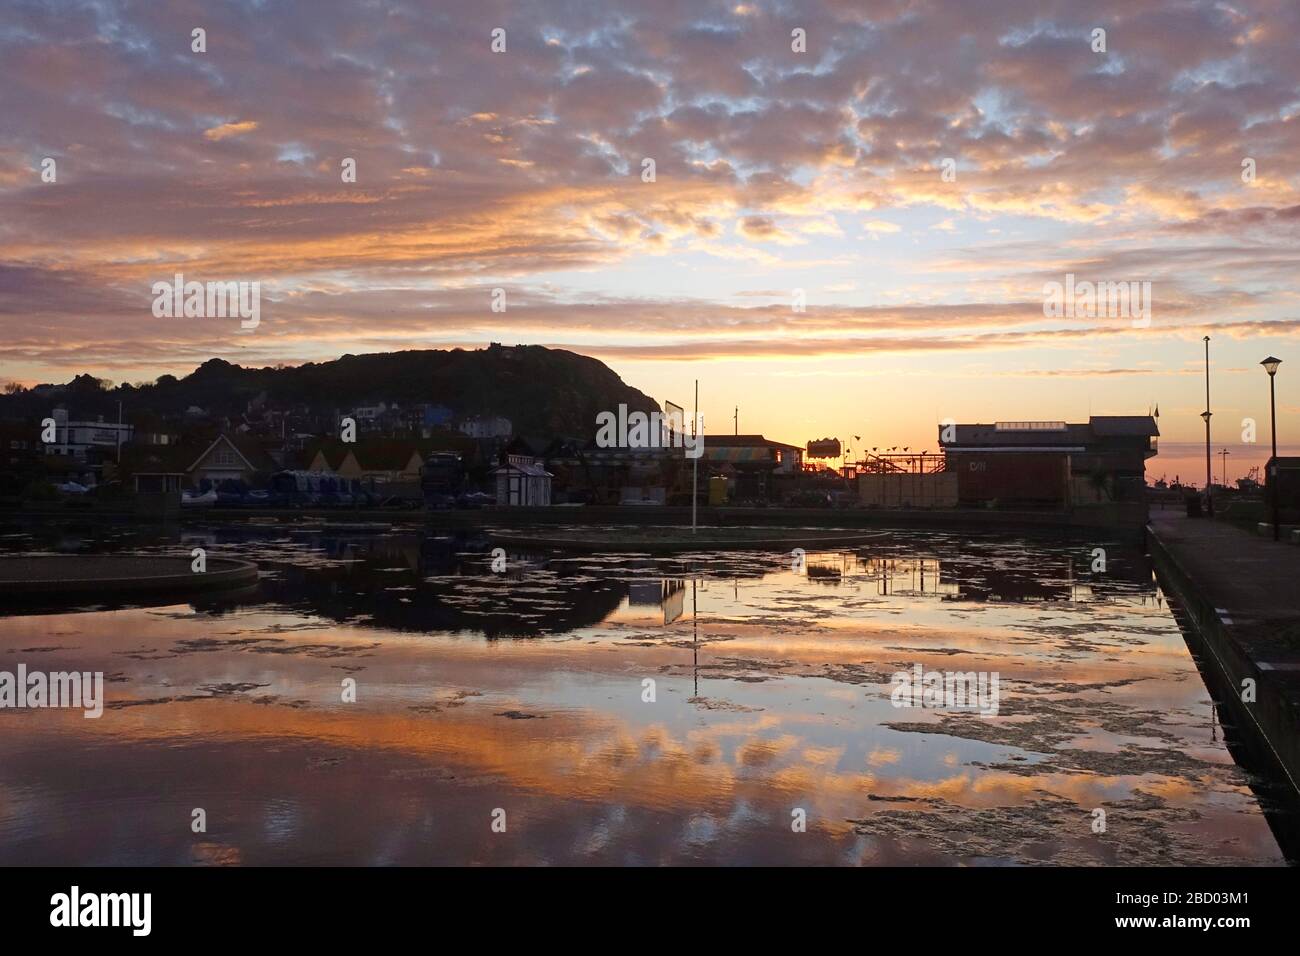 Hastings, East Sussex, 6th April 2020. Sunrise behind the Life Boat House from across the deserted boating lake. Very few people out this morning. Mild with clear skies turning cloudy and with light rain forecast for later. Carolyn Clarke/Alamy Live News Stock Photo